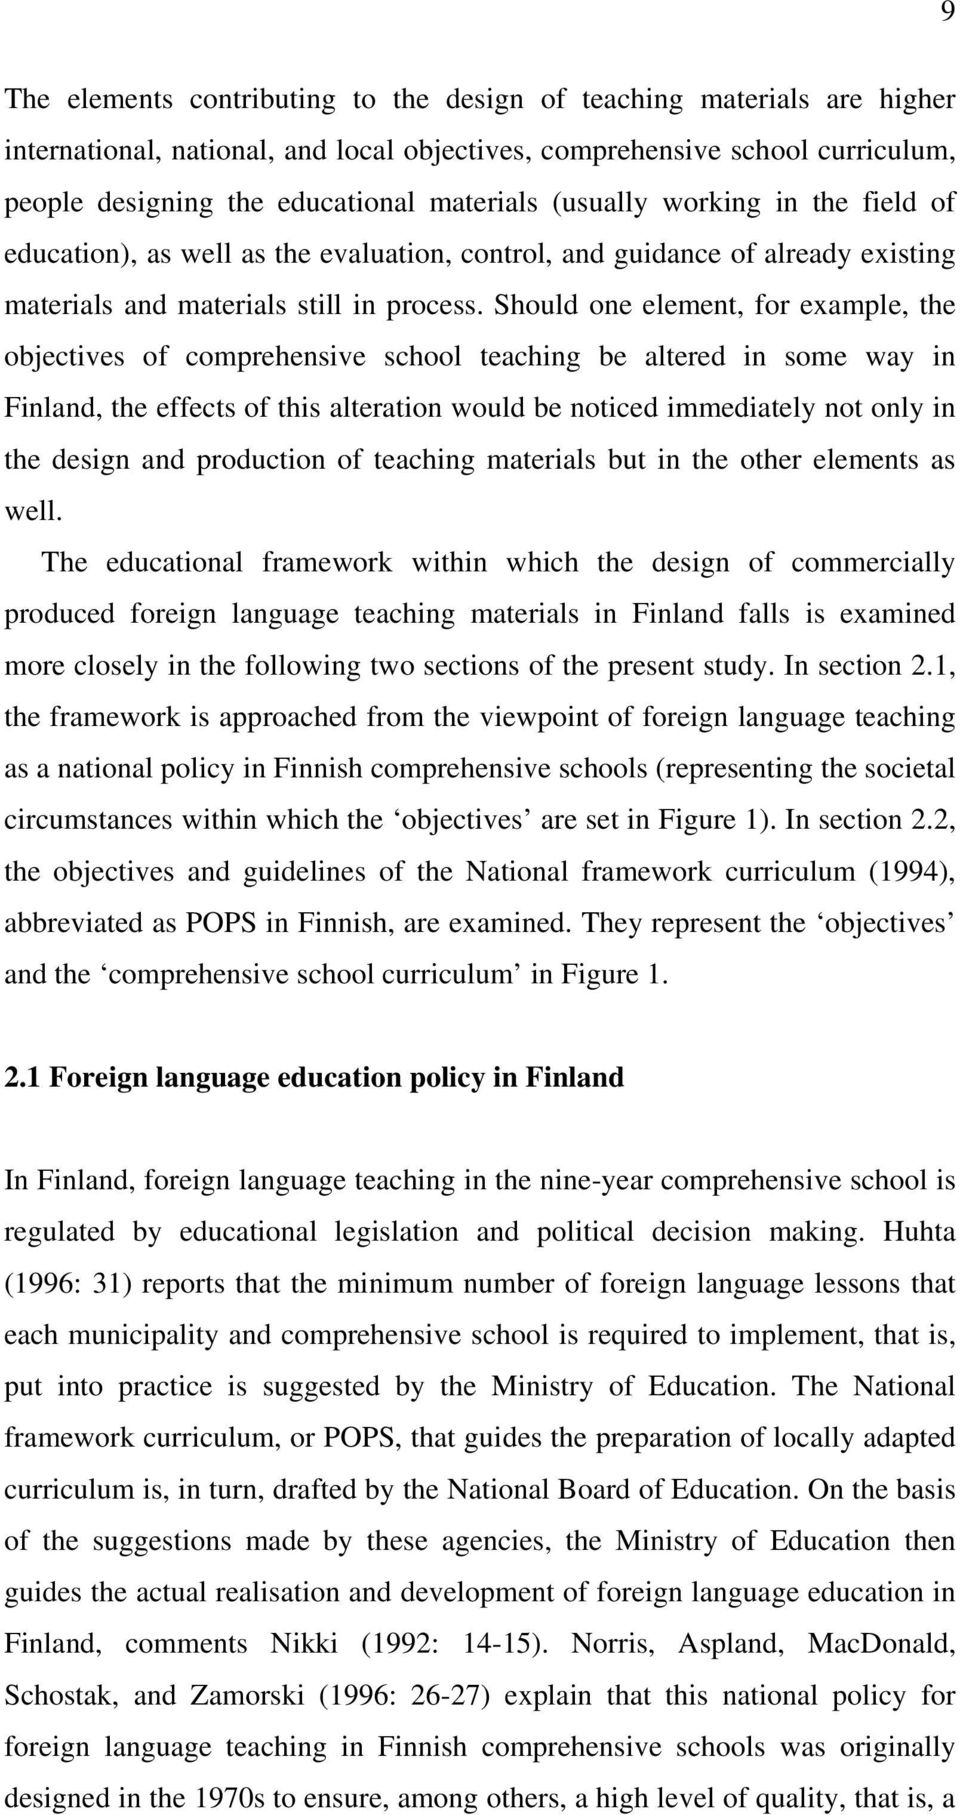 Should one element, for example, the objectives of comprehensive school teaching be altered in some way in Finland, the effects of this alteration would be noticed immediately not only in the design